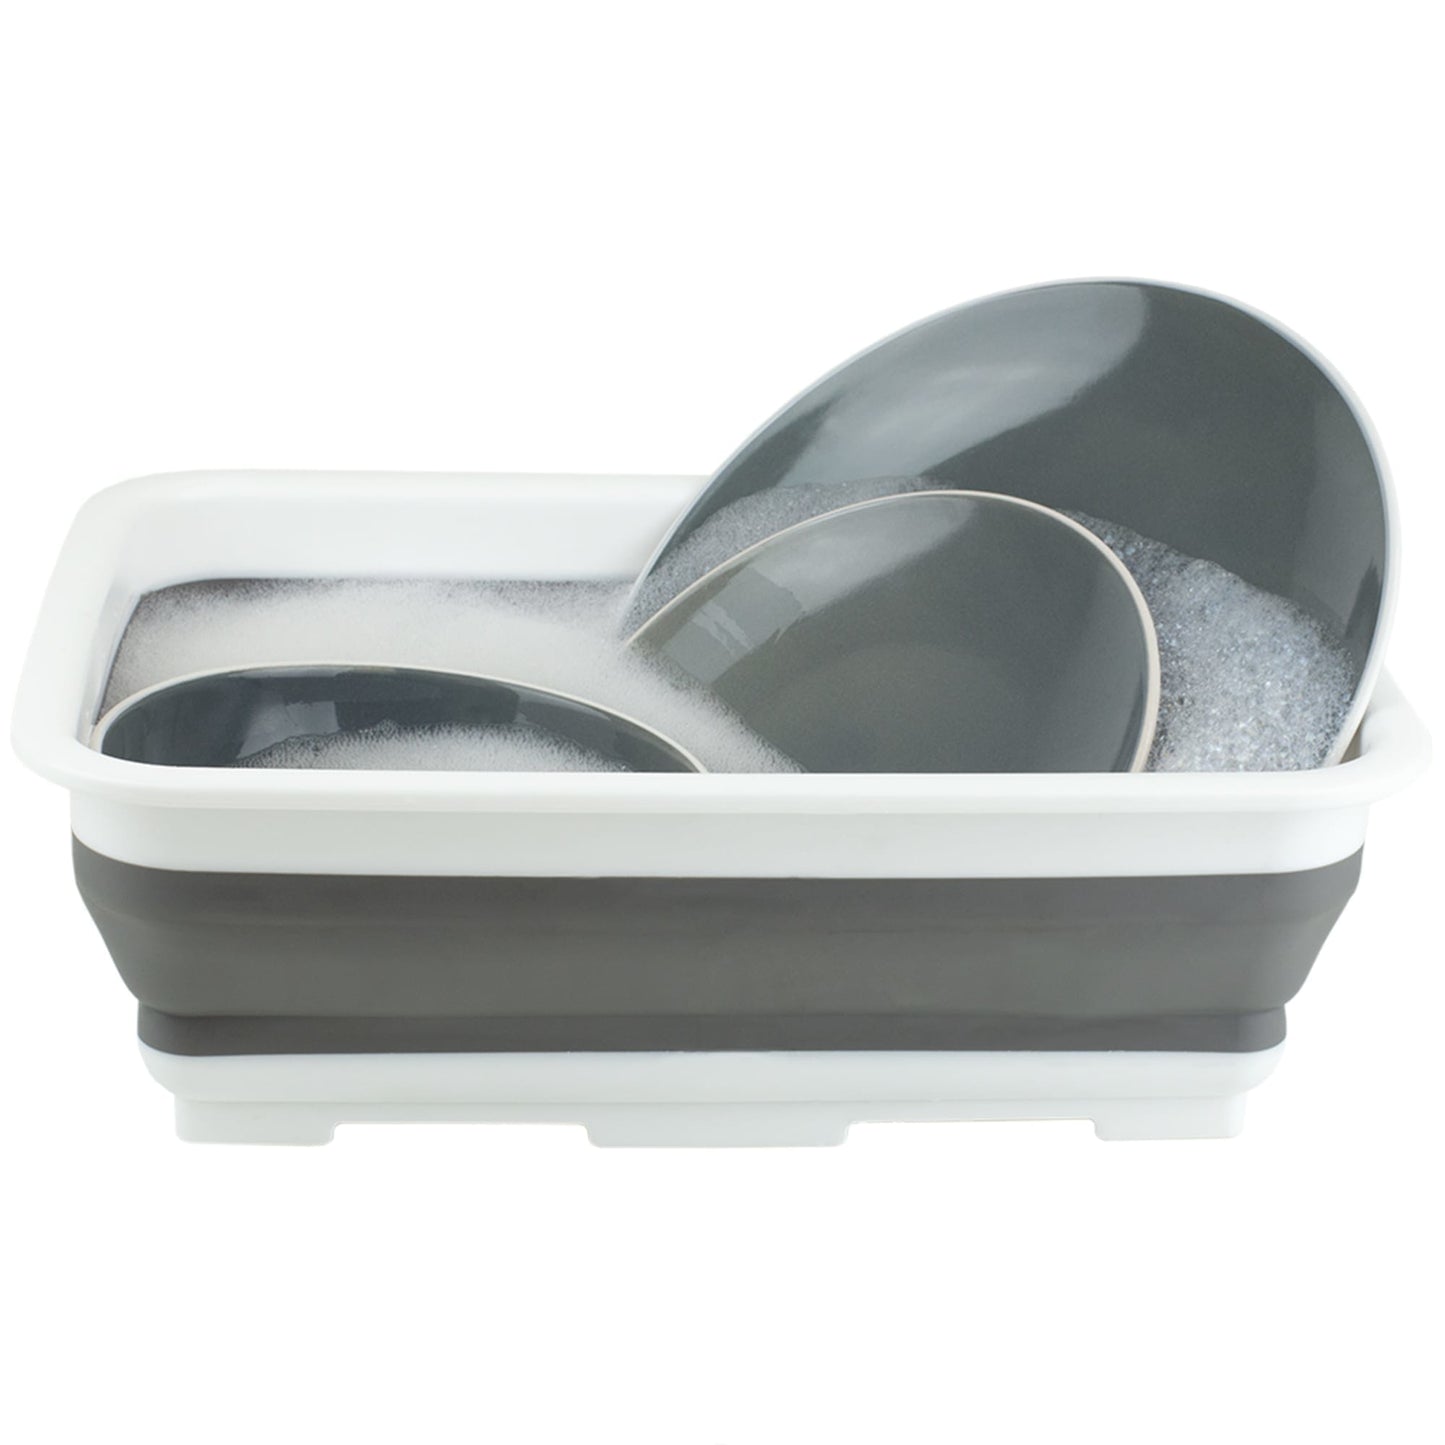 Collapsible Silicone and Plastic Multi-Purpose Storage Washing Basin, Grey